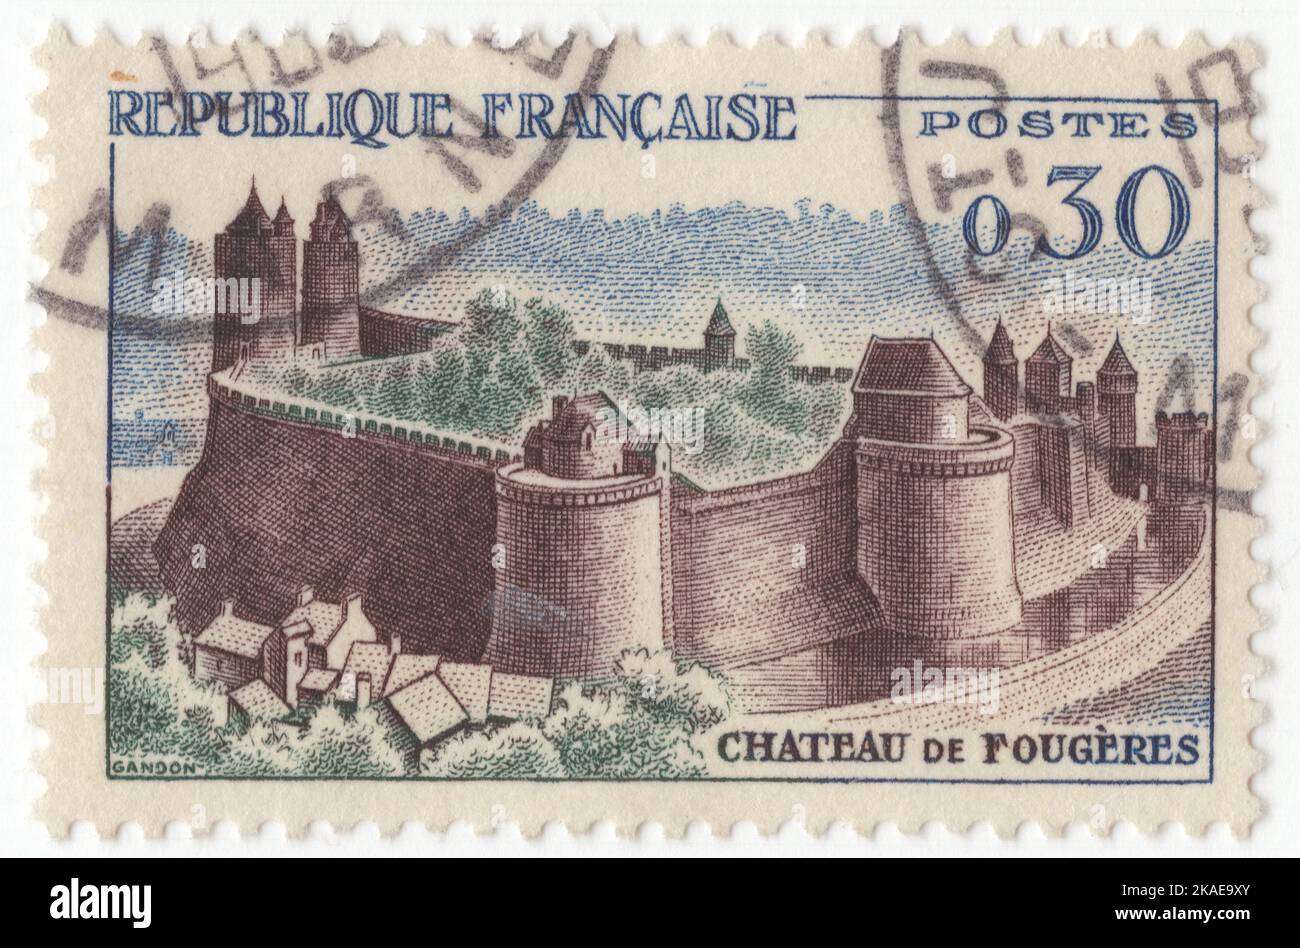 FRANCE - 1960 January 16: An 30 centimes blue, sepia and green postage stamp depicting Fougeres Chateau (Château de Fougères) is a castle in the commune of Fougeres in the Ille-et-Vilaine departement of France. The castle was built on a naturally protected site, a rock emerging from a swamp surrounded by a loop of the Nancon river acting as a natural moat. It had three different enclosures: the first for defensive purposes; the second for day to day usages in peacetime and for safety of the surrounding populations in times of siege; and the last for the protection of the keep Stock Photo